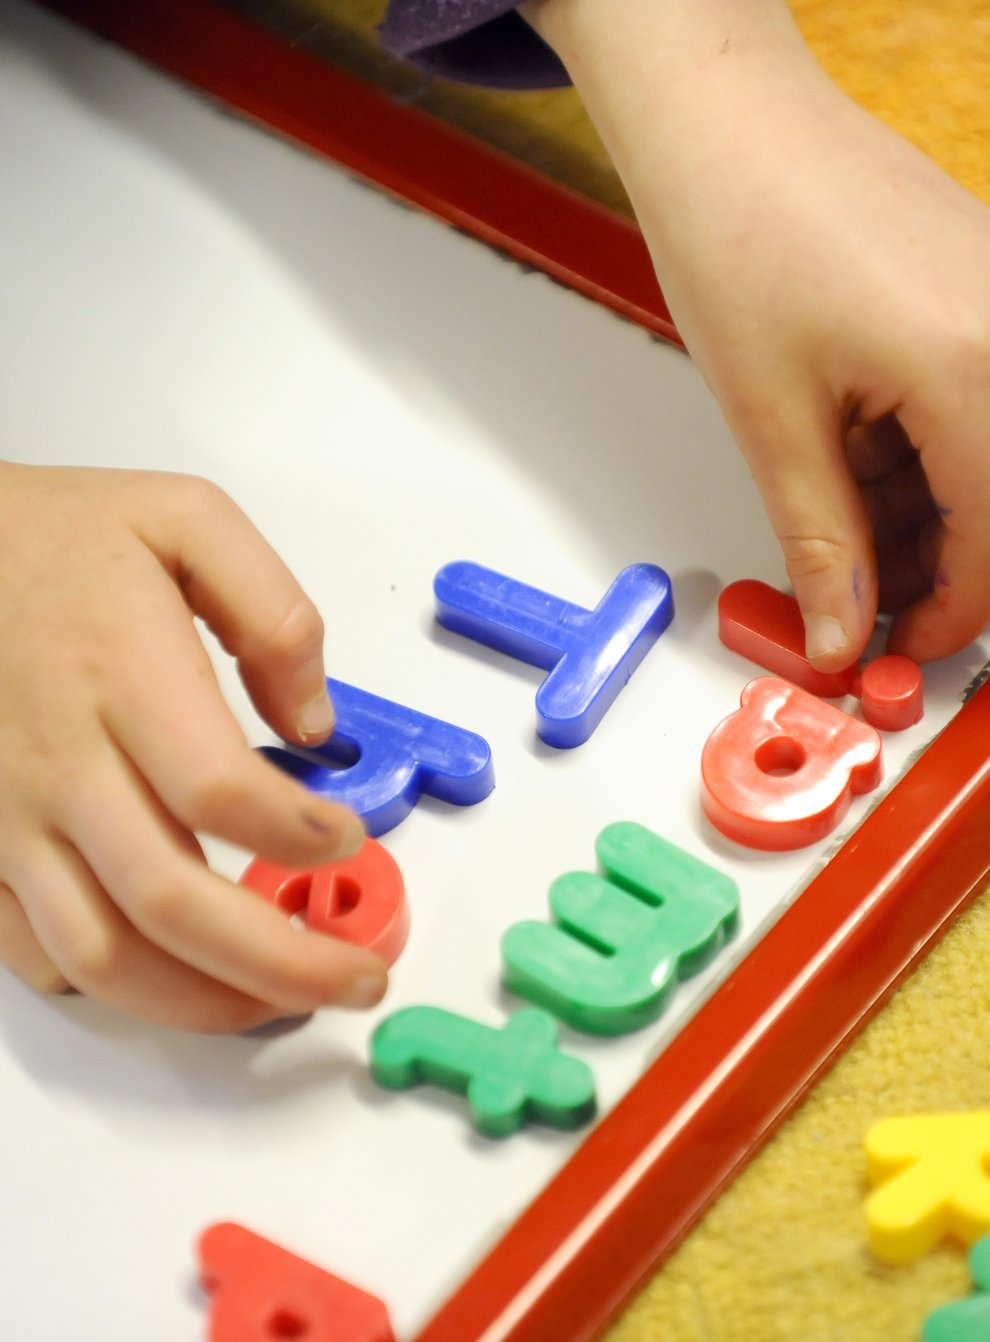 The overall number of childcare providers in England dropped by around 4,000 between March 2021 and March 2022 (Dominic Lipinski/PA)